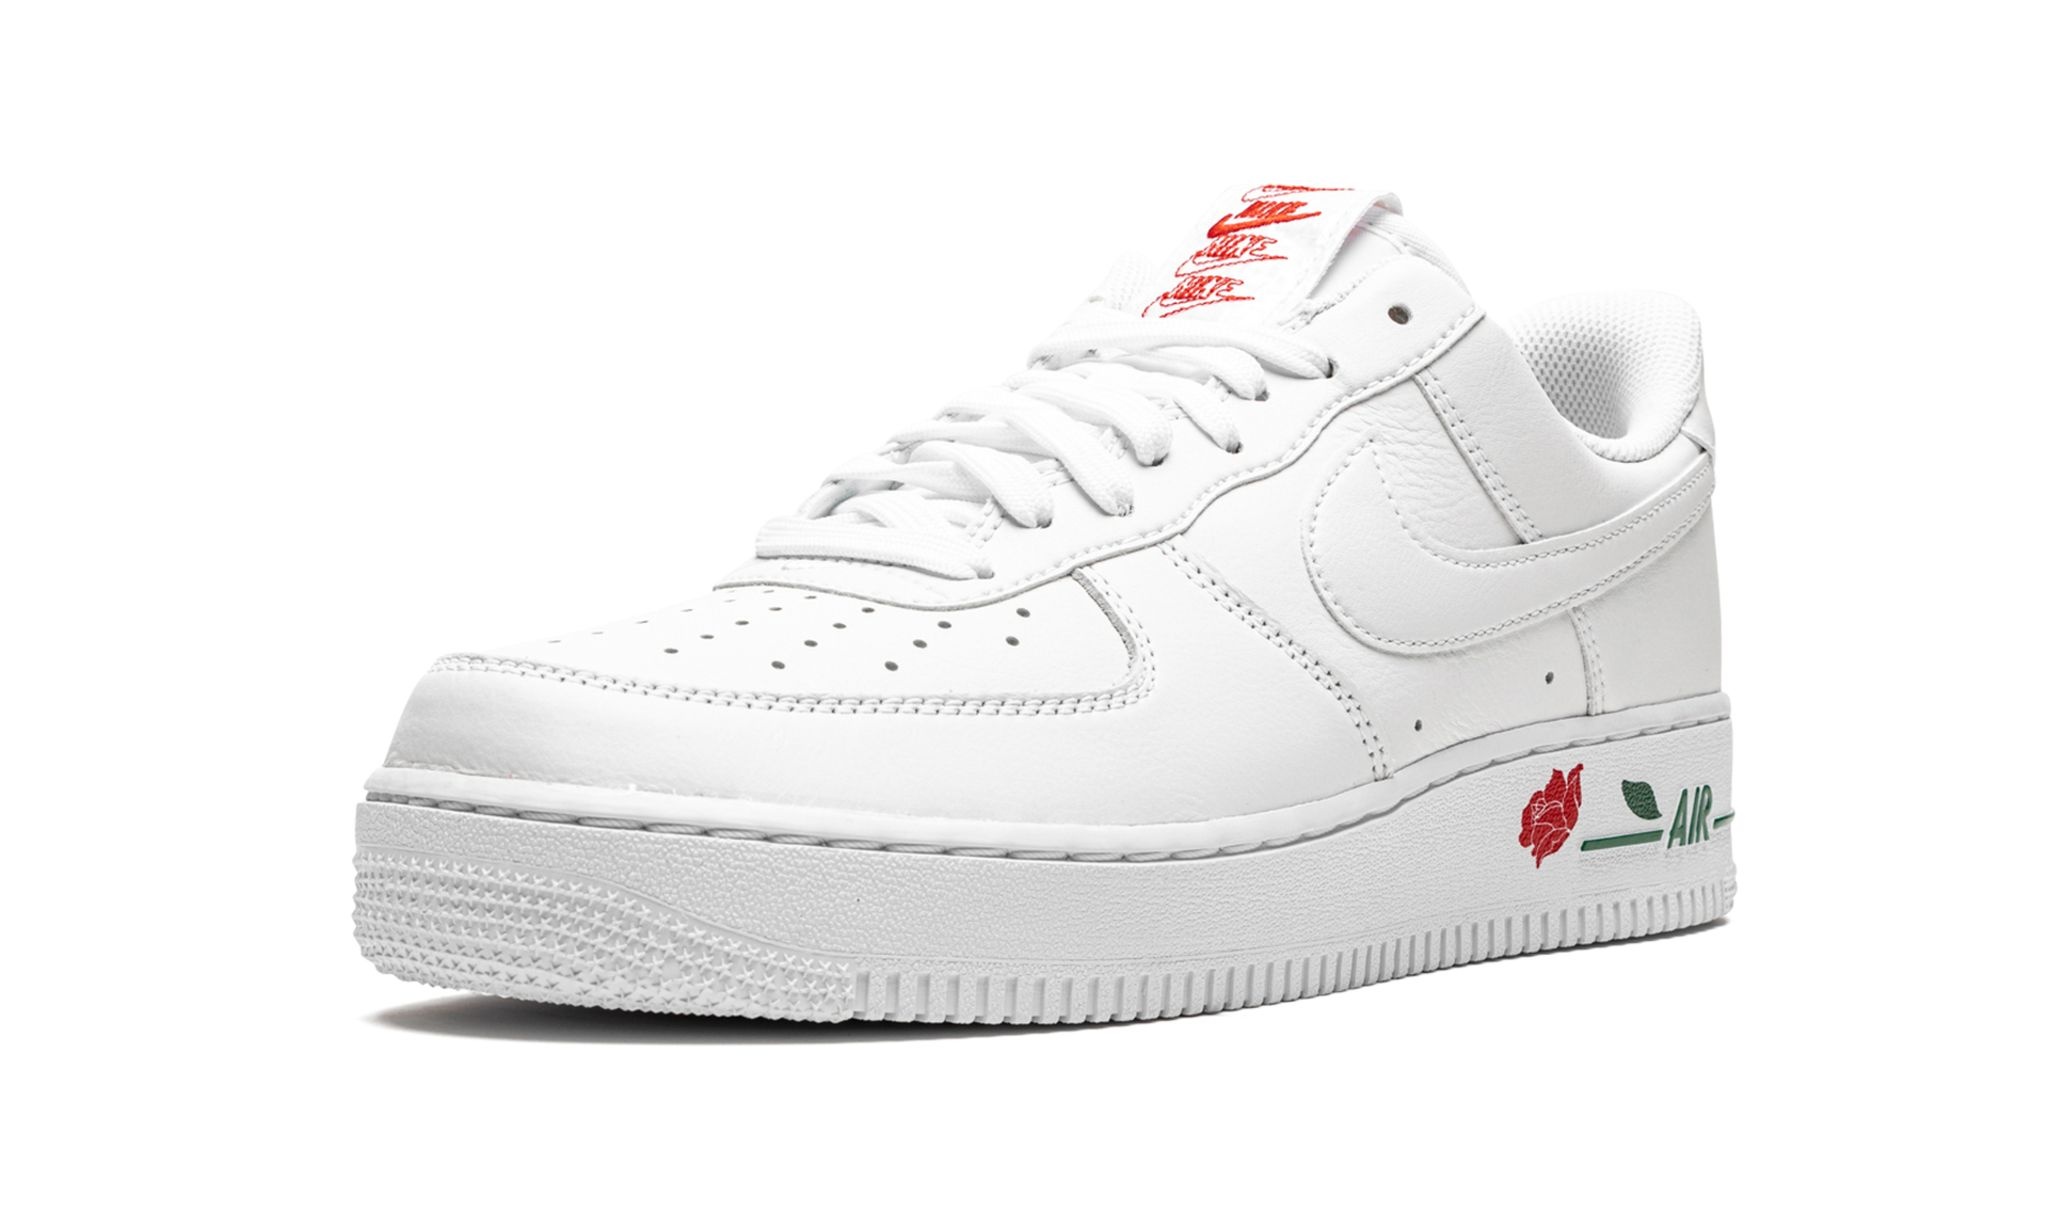 Air Force 1 Low '07 LX "Thank You Plastic Bag" - 4